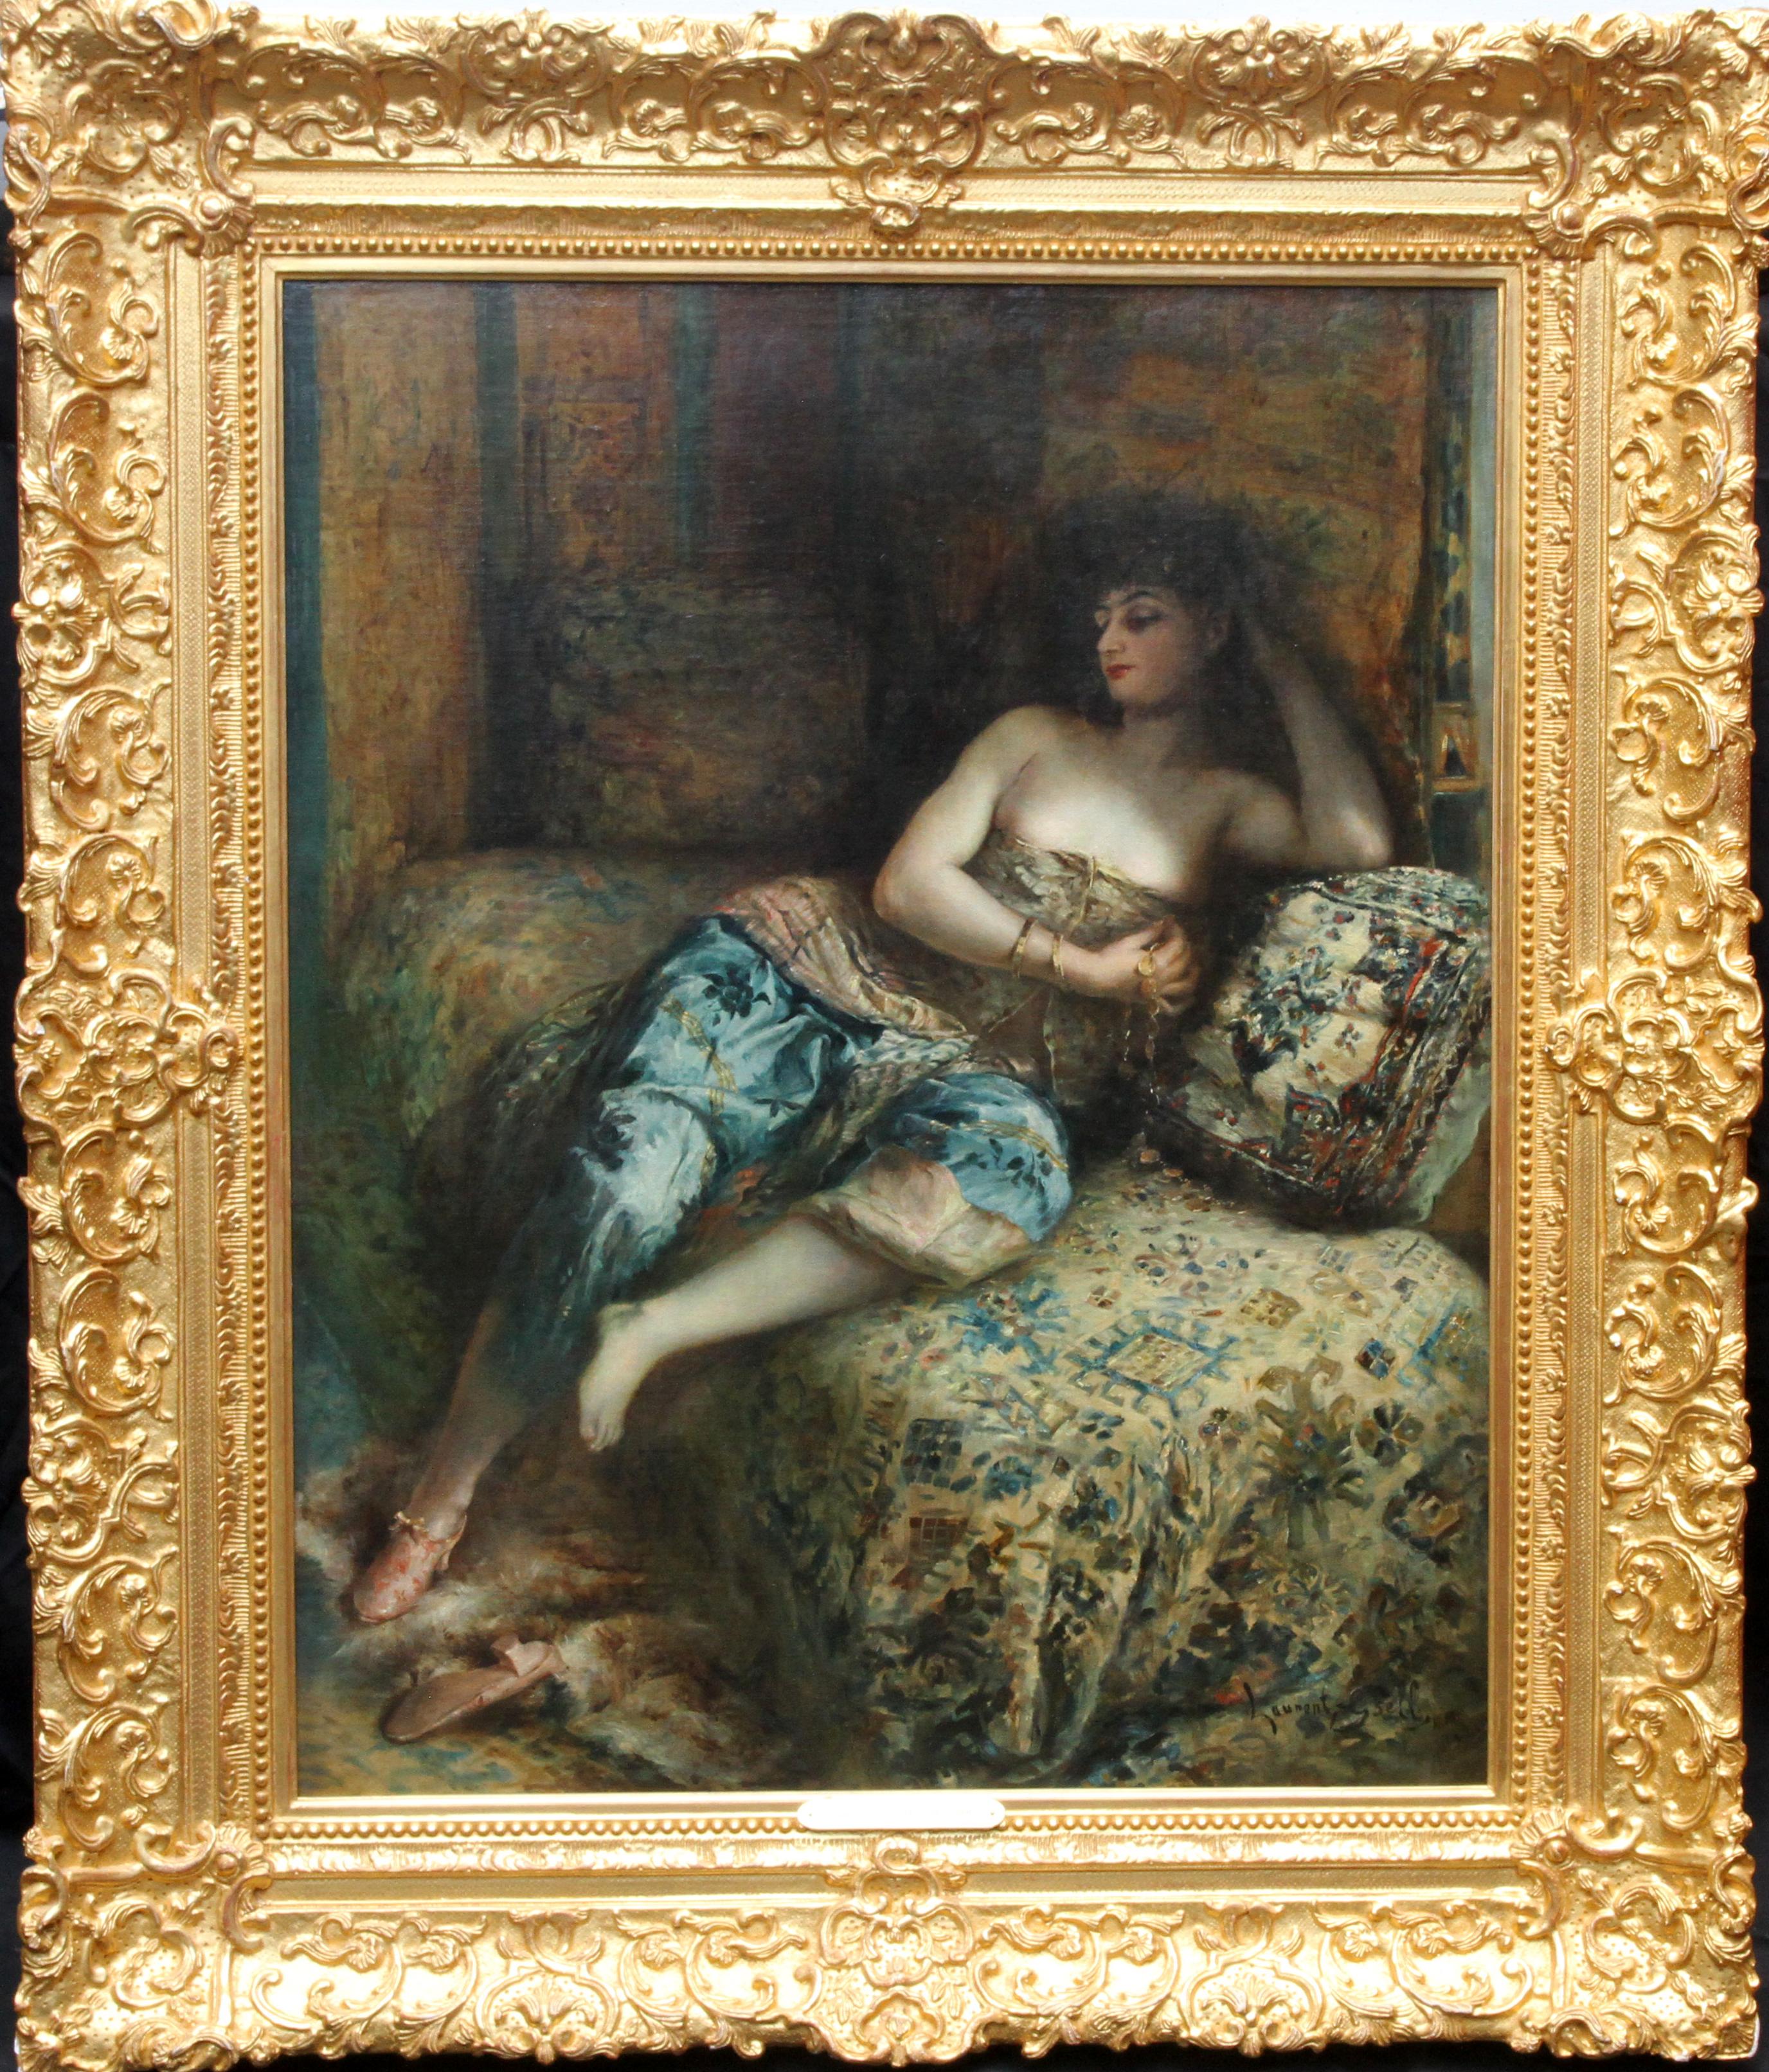 Odalisque - Woman in a Harem - French 1900 Orientalist art portrait oil painting For Sale 11